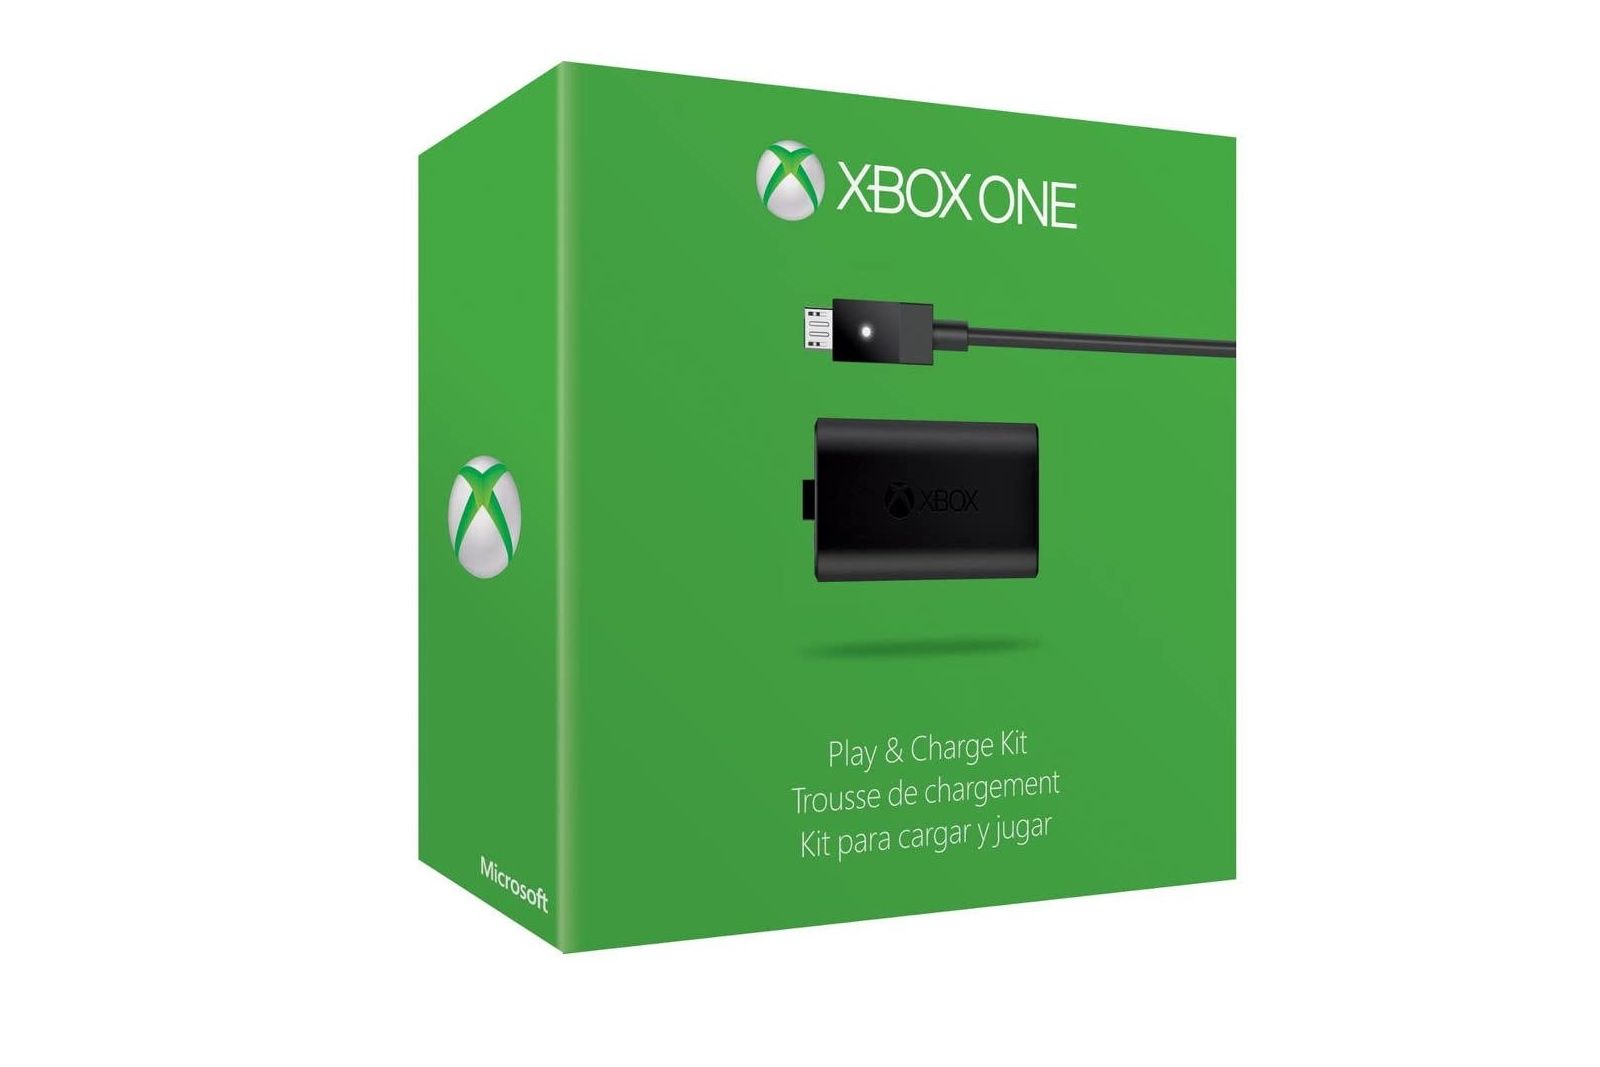 Best Xbox One accessories 2020: Upgrade your Xbox experience with these handy gadgets photo 3